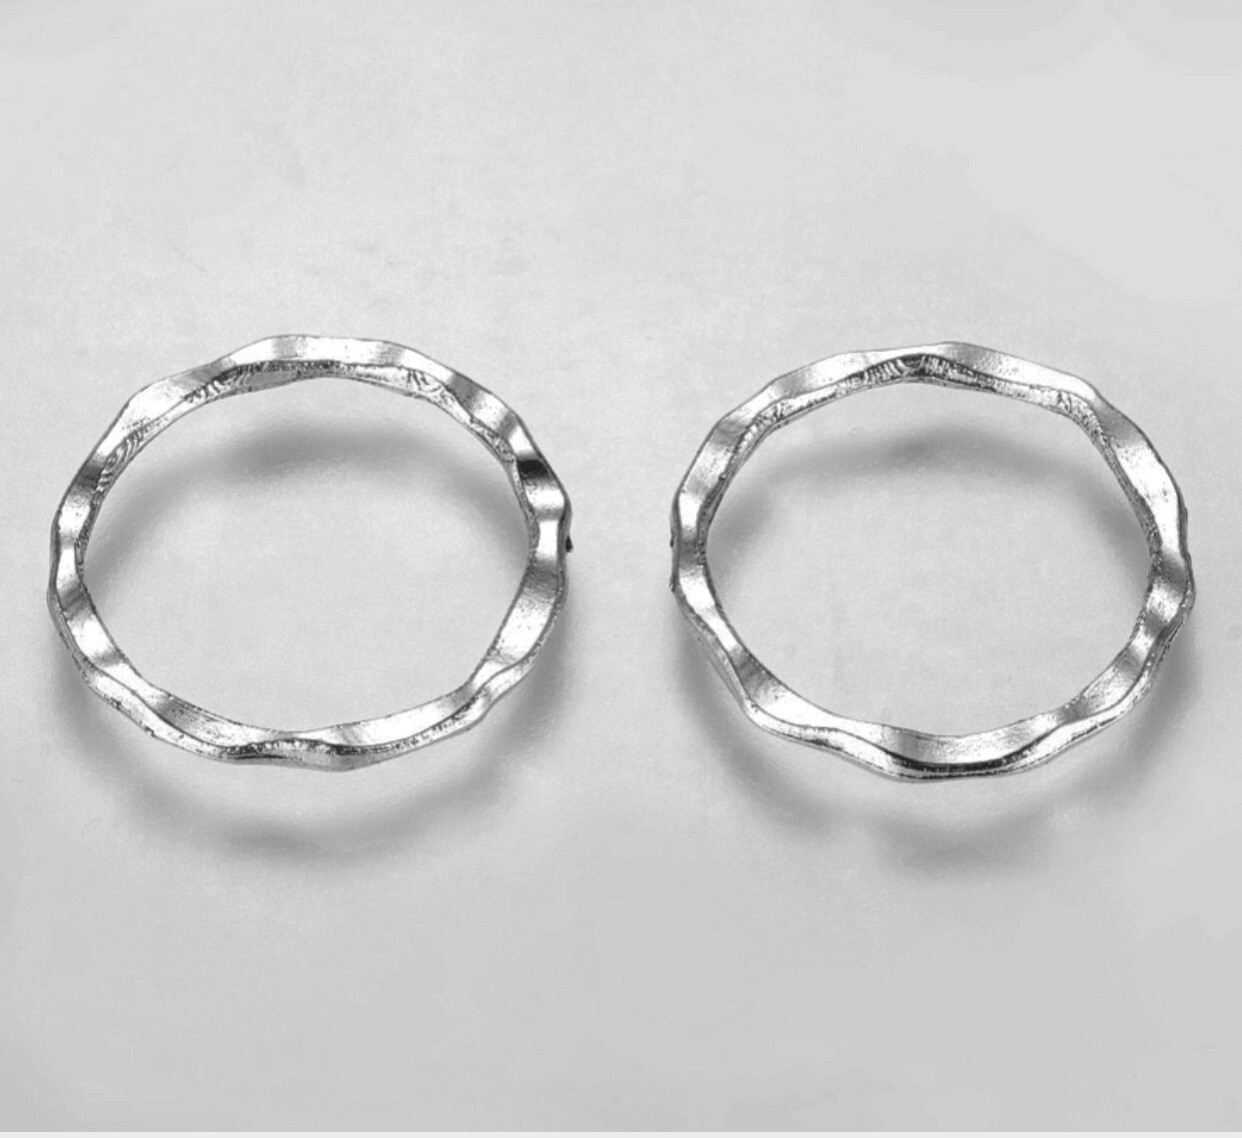 20 x Antique Silver Linking Rings, 22x1.5mm